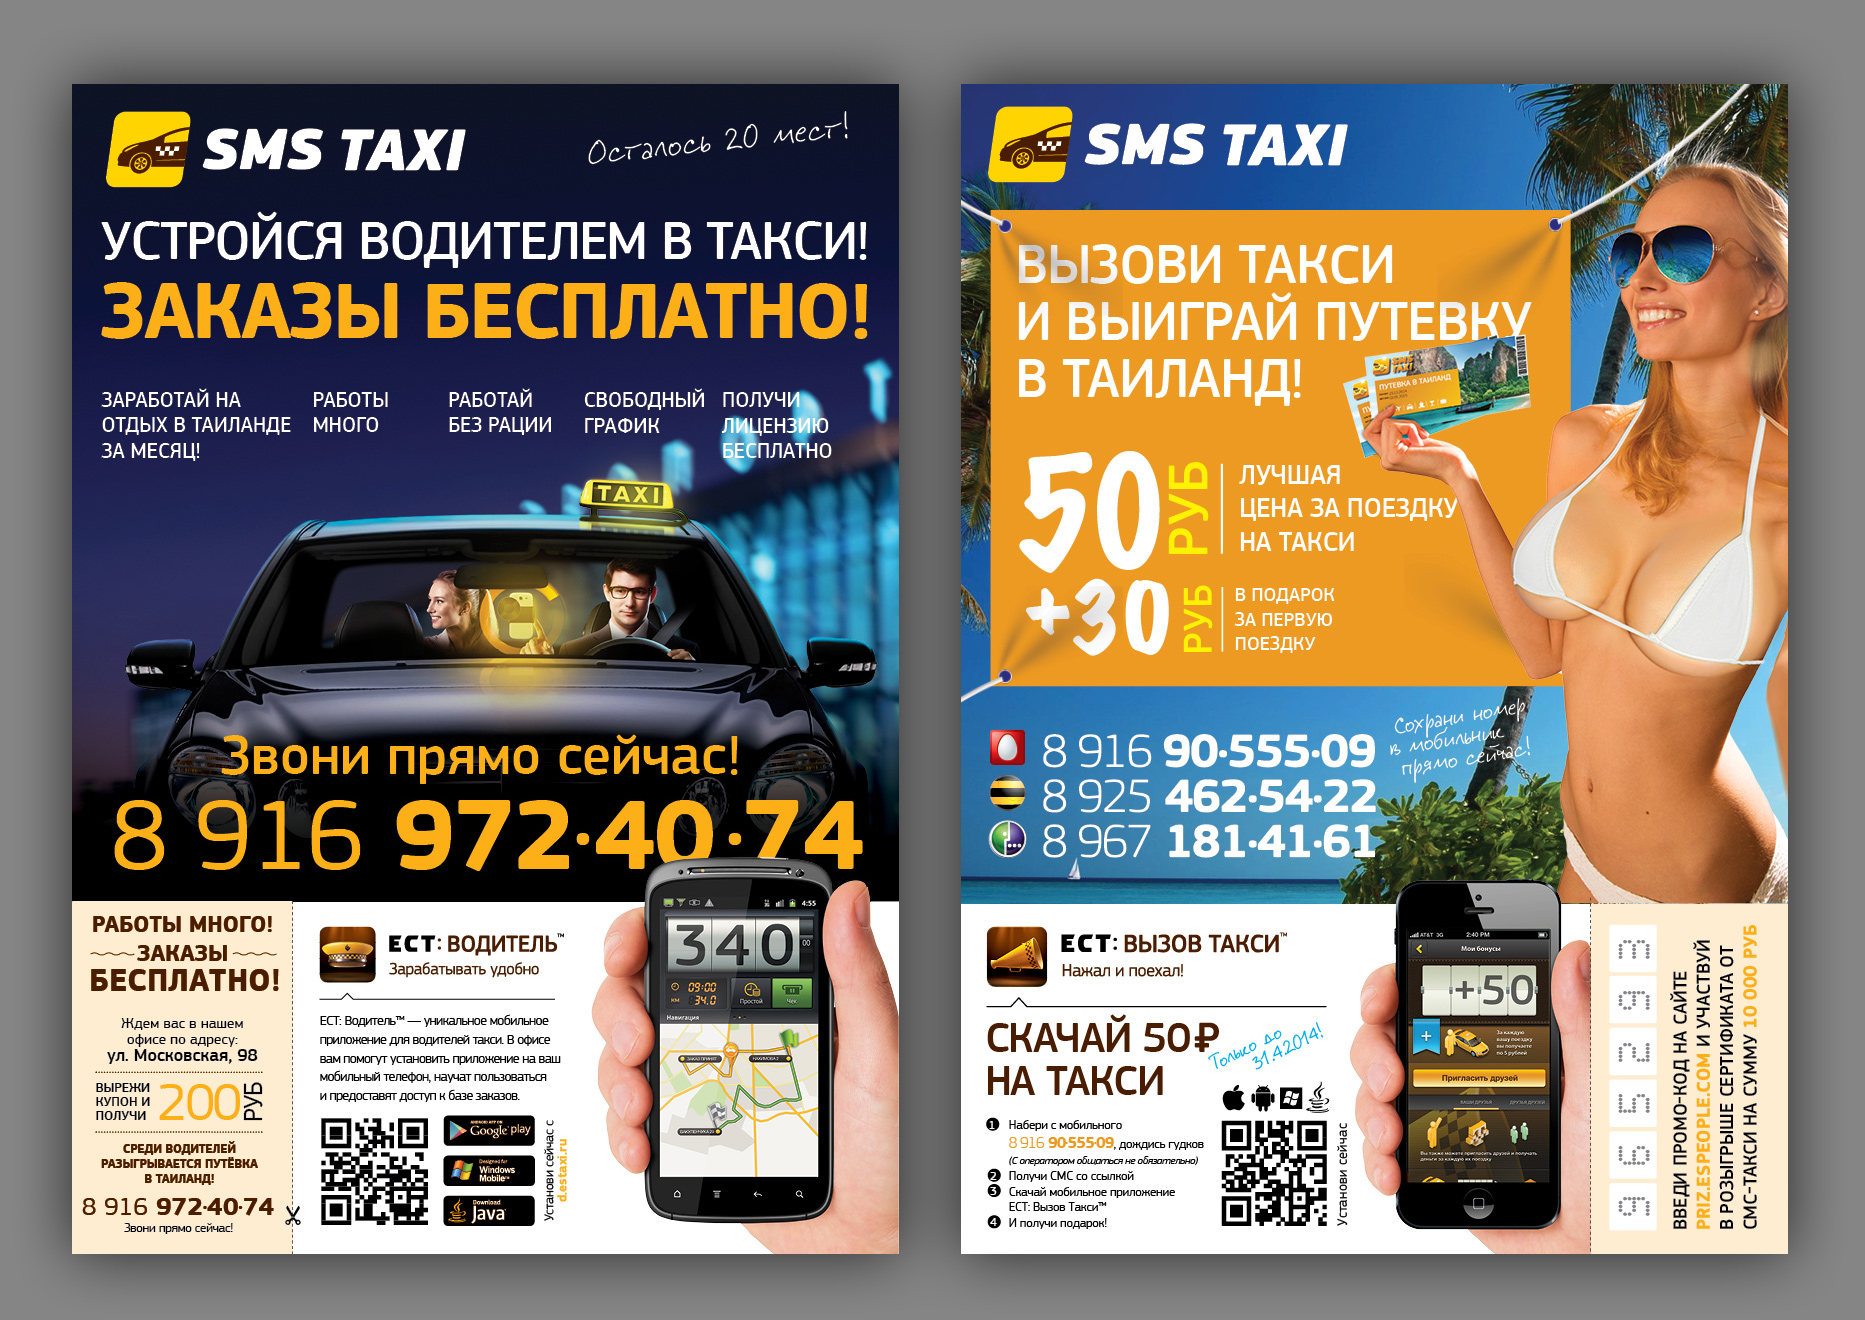 sms_taxi_А4_client_new-sborka.jpg